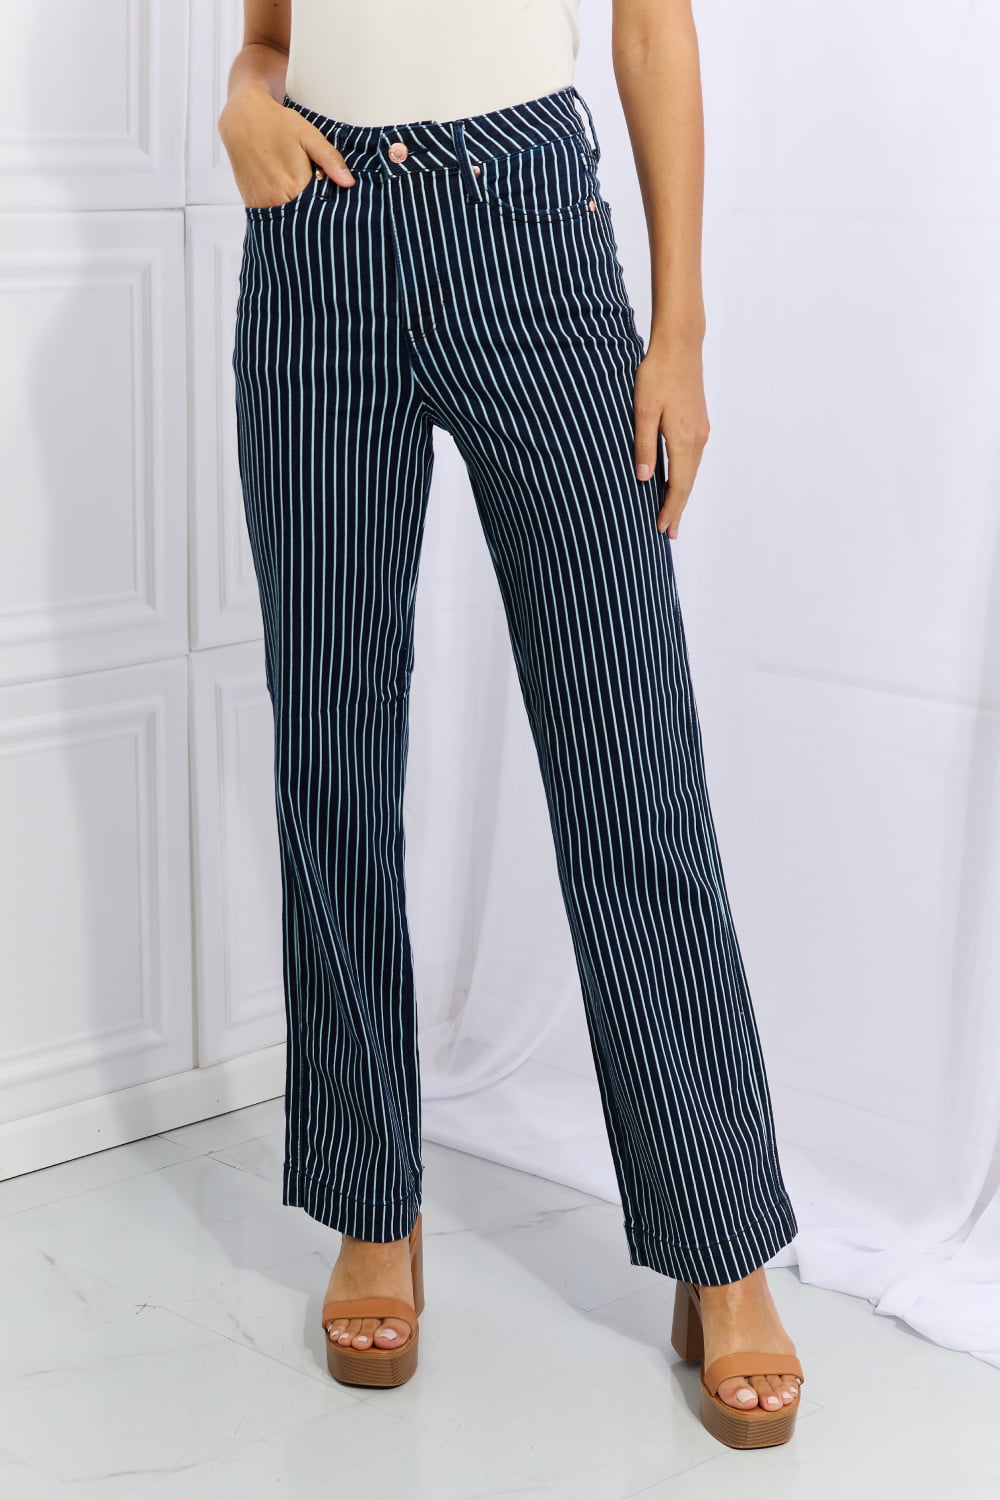 Judy Blue Tummy Control Striped Straight Jeans - Online Only DS